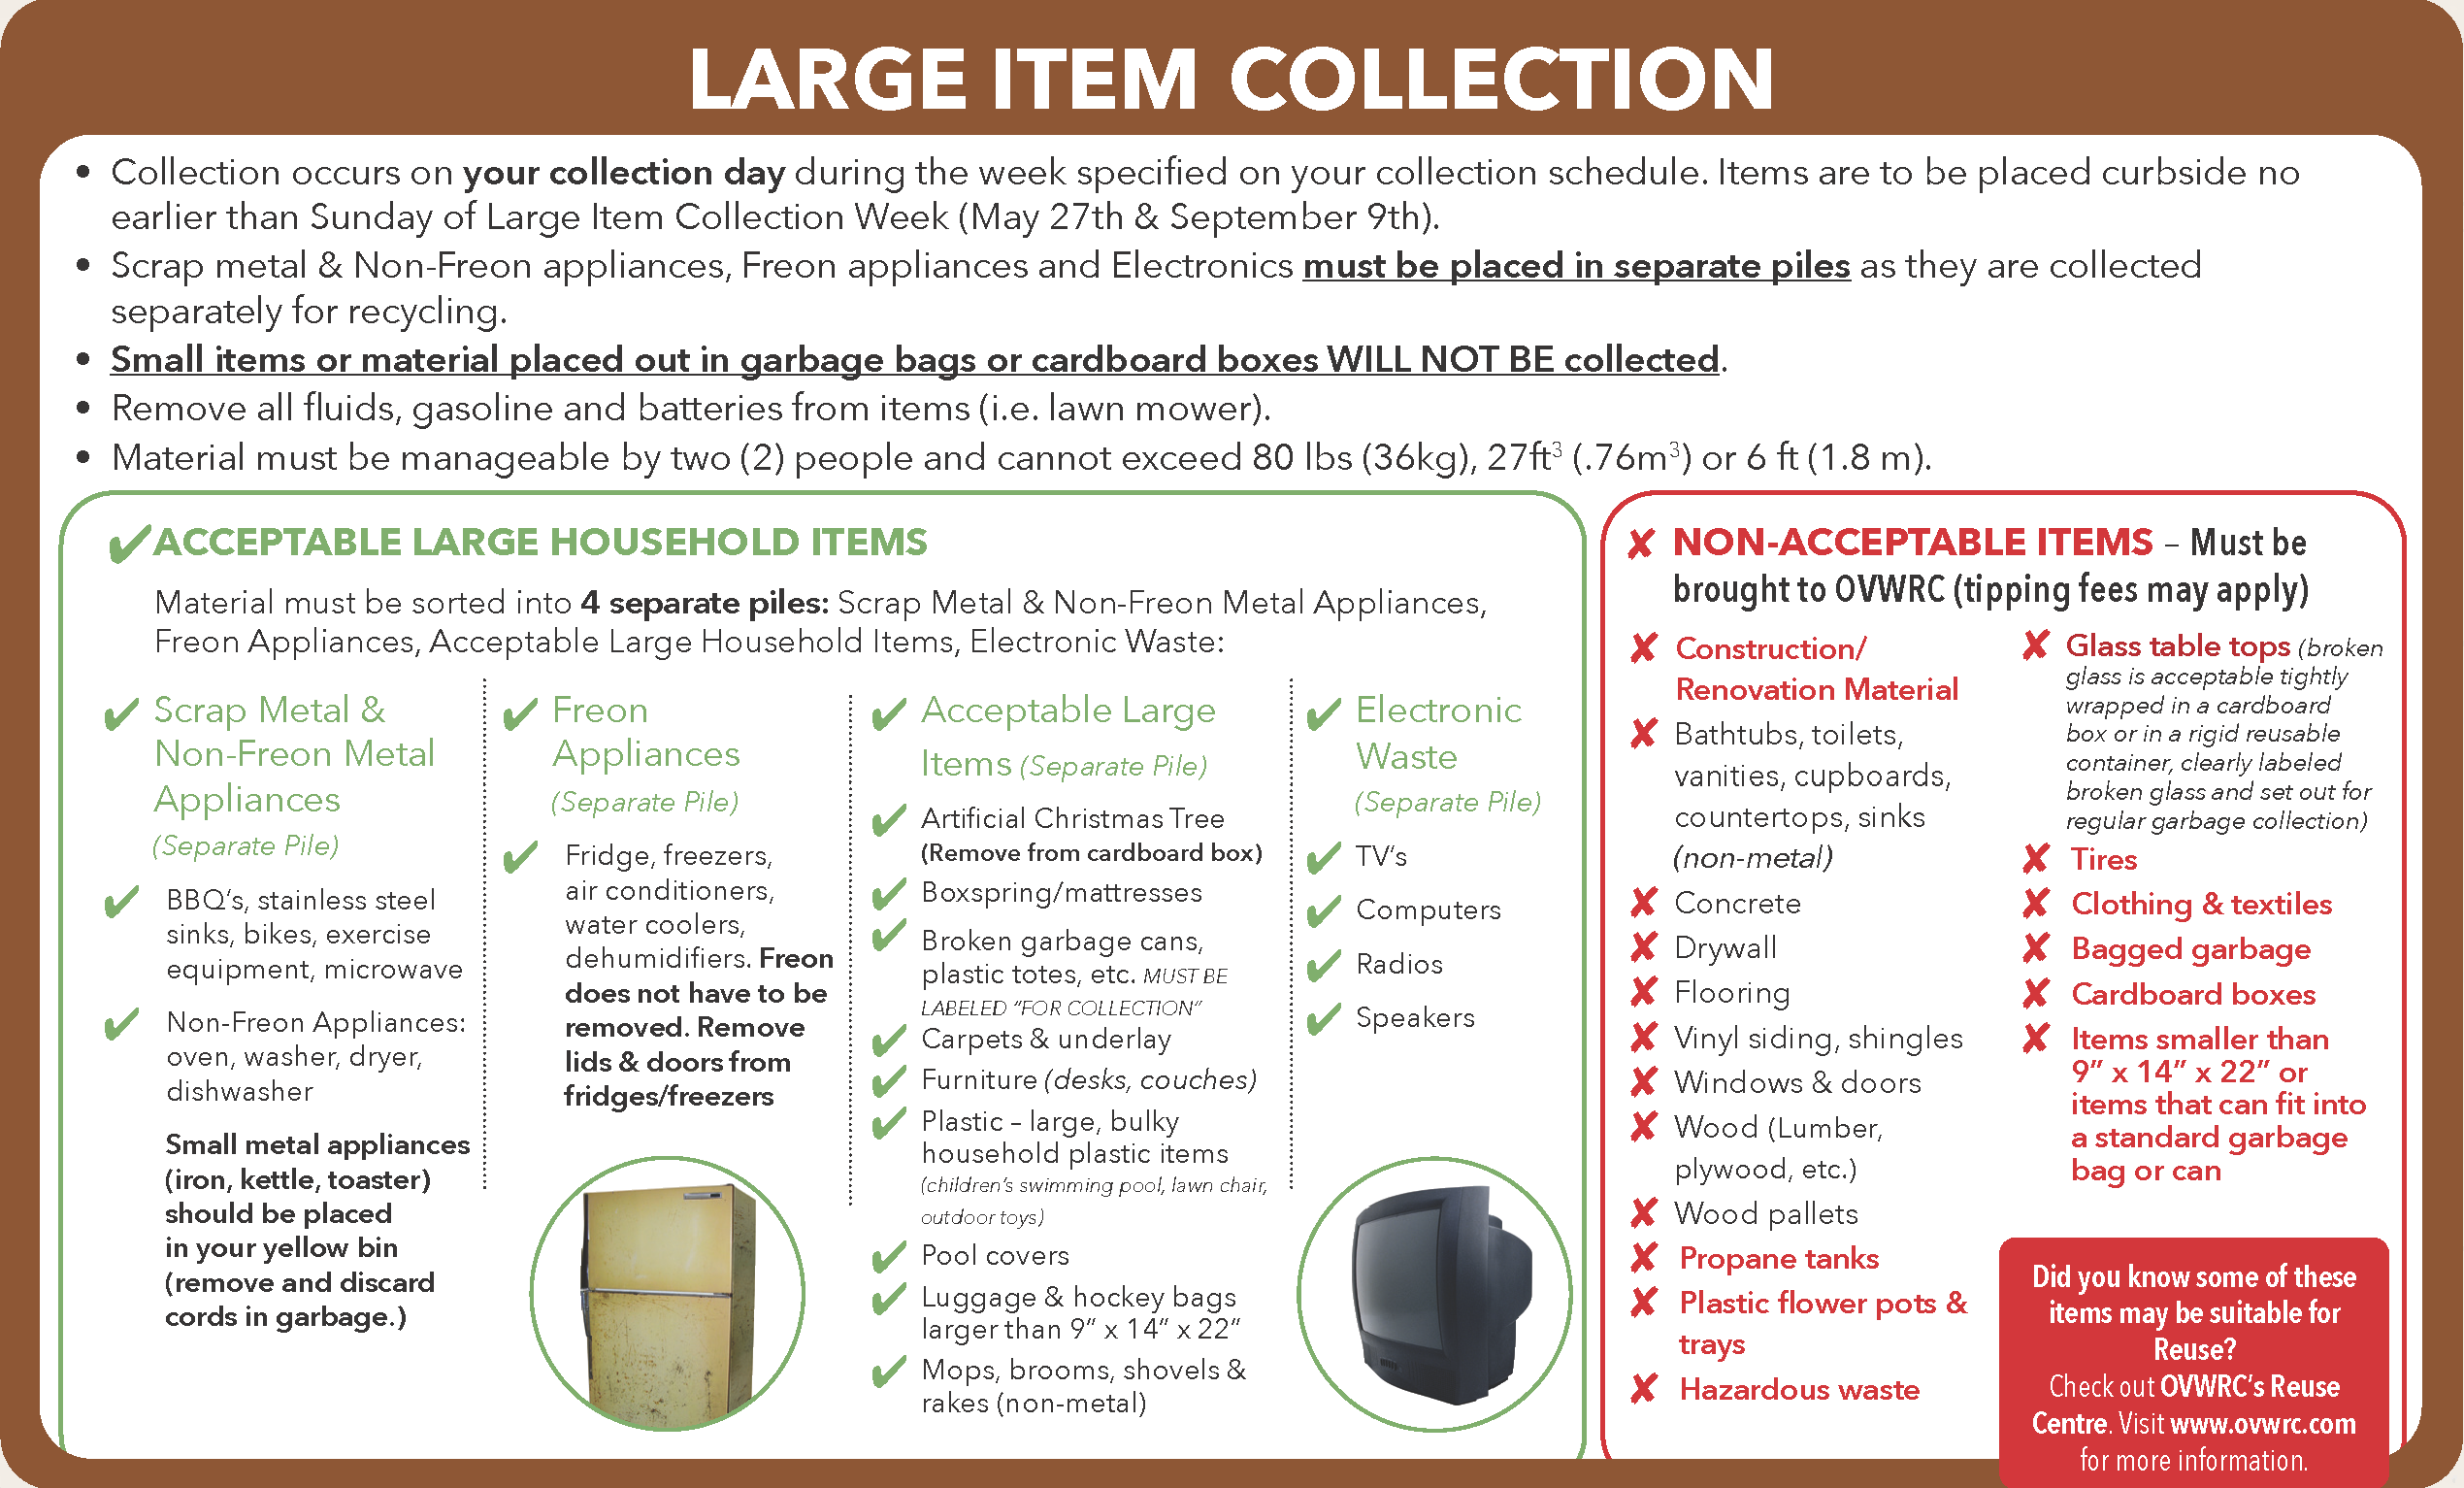 Chart identifying what is and is not accepted in the Large Item Collection program.